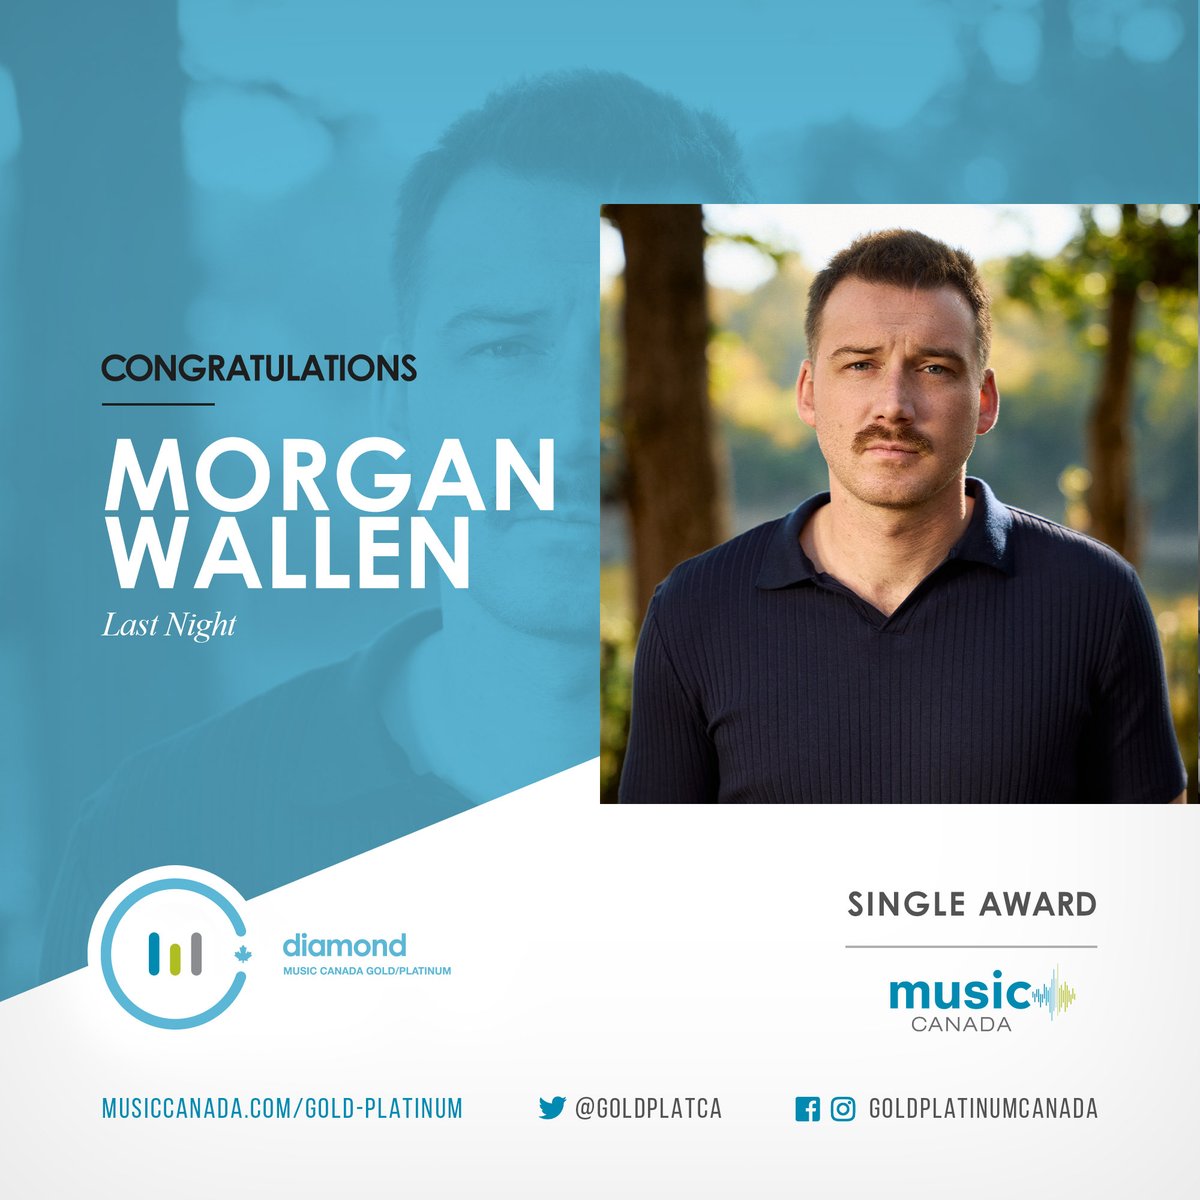 Congratulations to @MorganWallen, who earned a Diamond certification for his single “Last Night” from his album “One Thing At A Time” @BigLoud @mercuryrecords @RepublicRecords @umusic